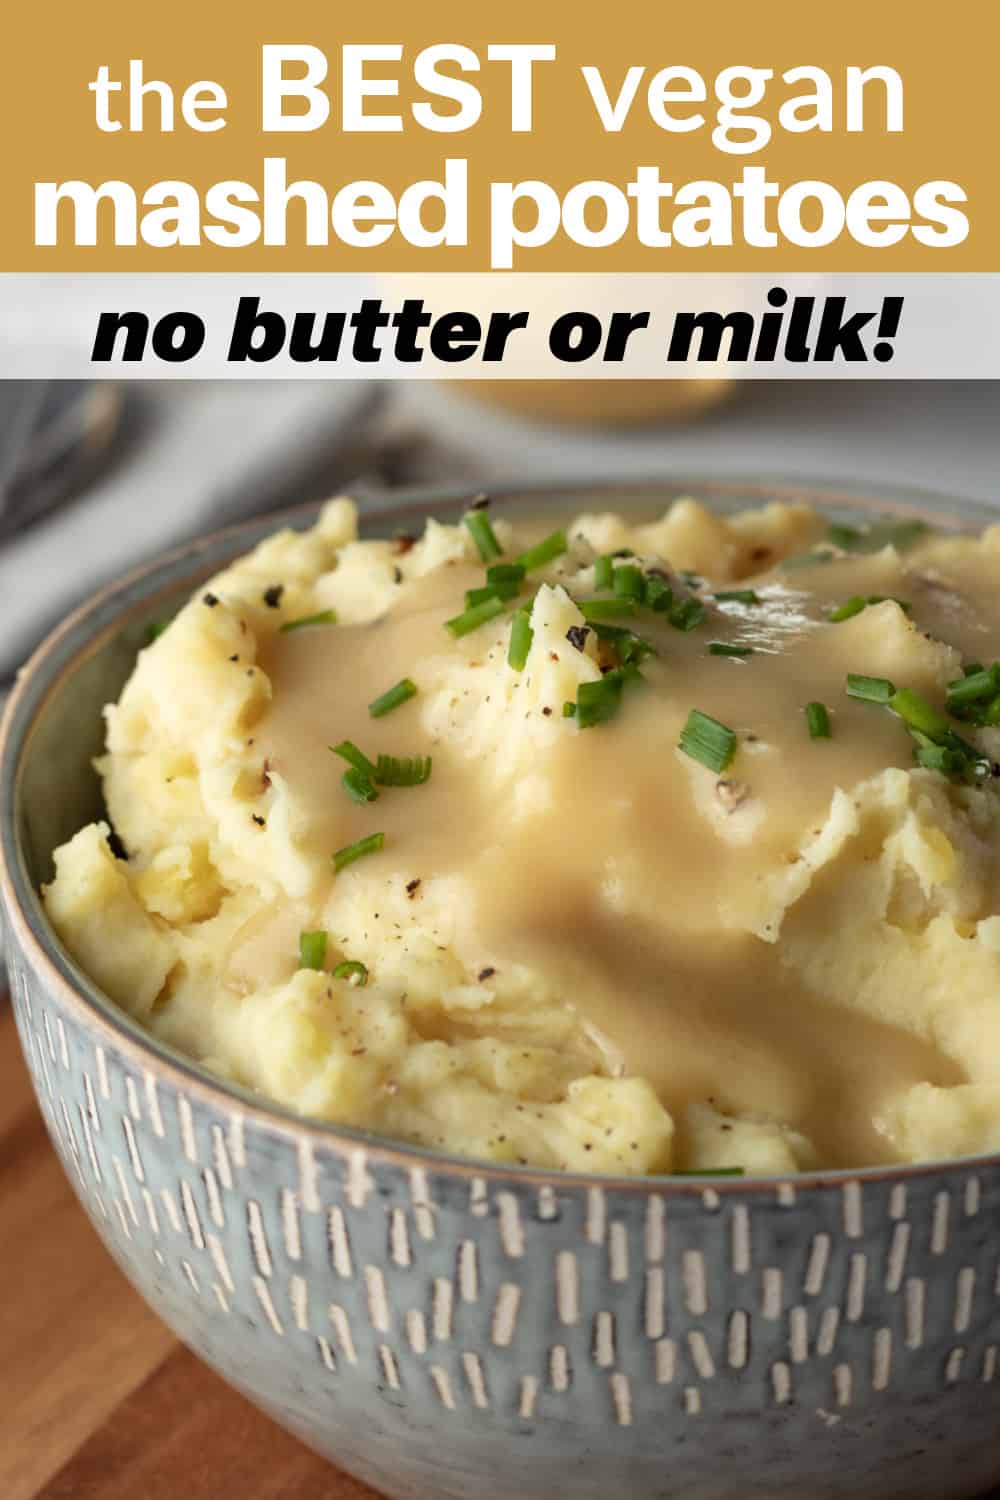 Vegan Mashed Potatoes Without Butter or Milk! - My Quiet Kitchen